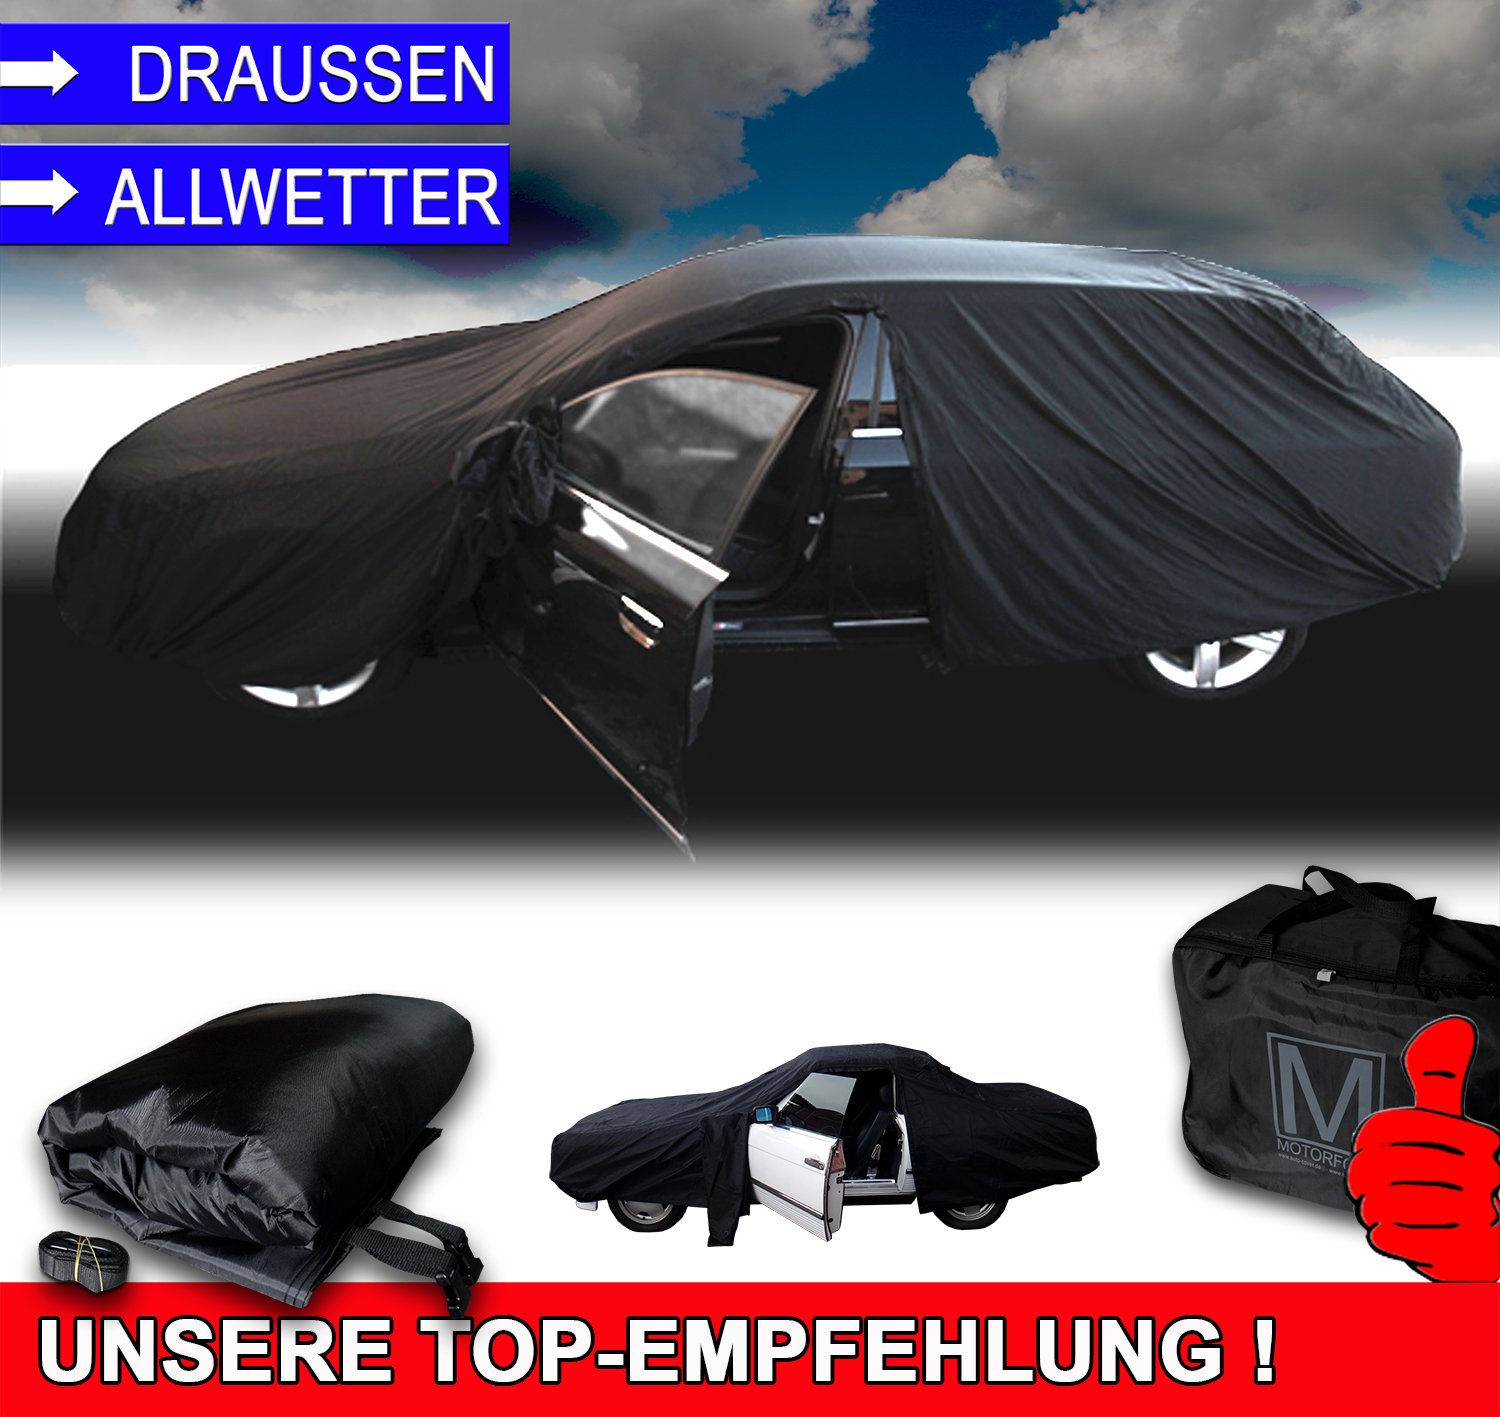 Optimo Outdoor Car Cover for Audi A4 / S4 / RS 4 RS4 Avant (2000